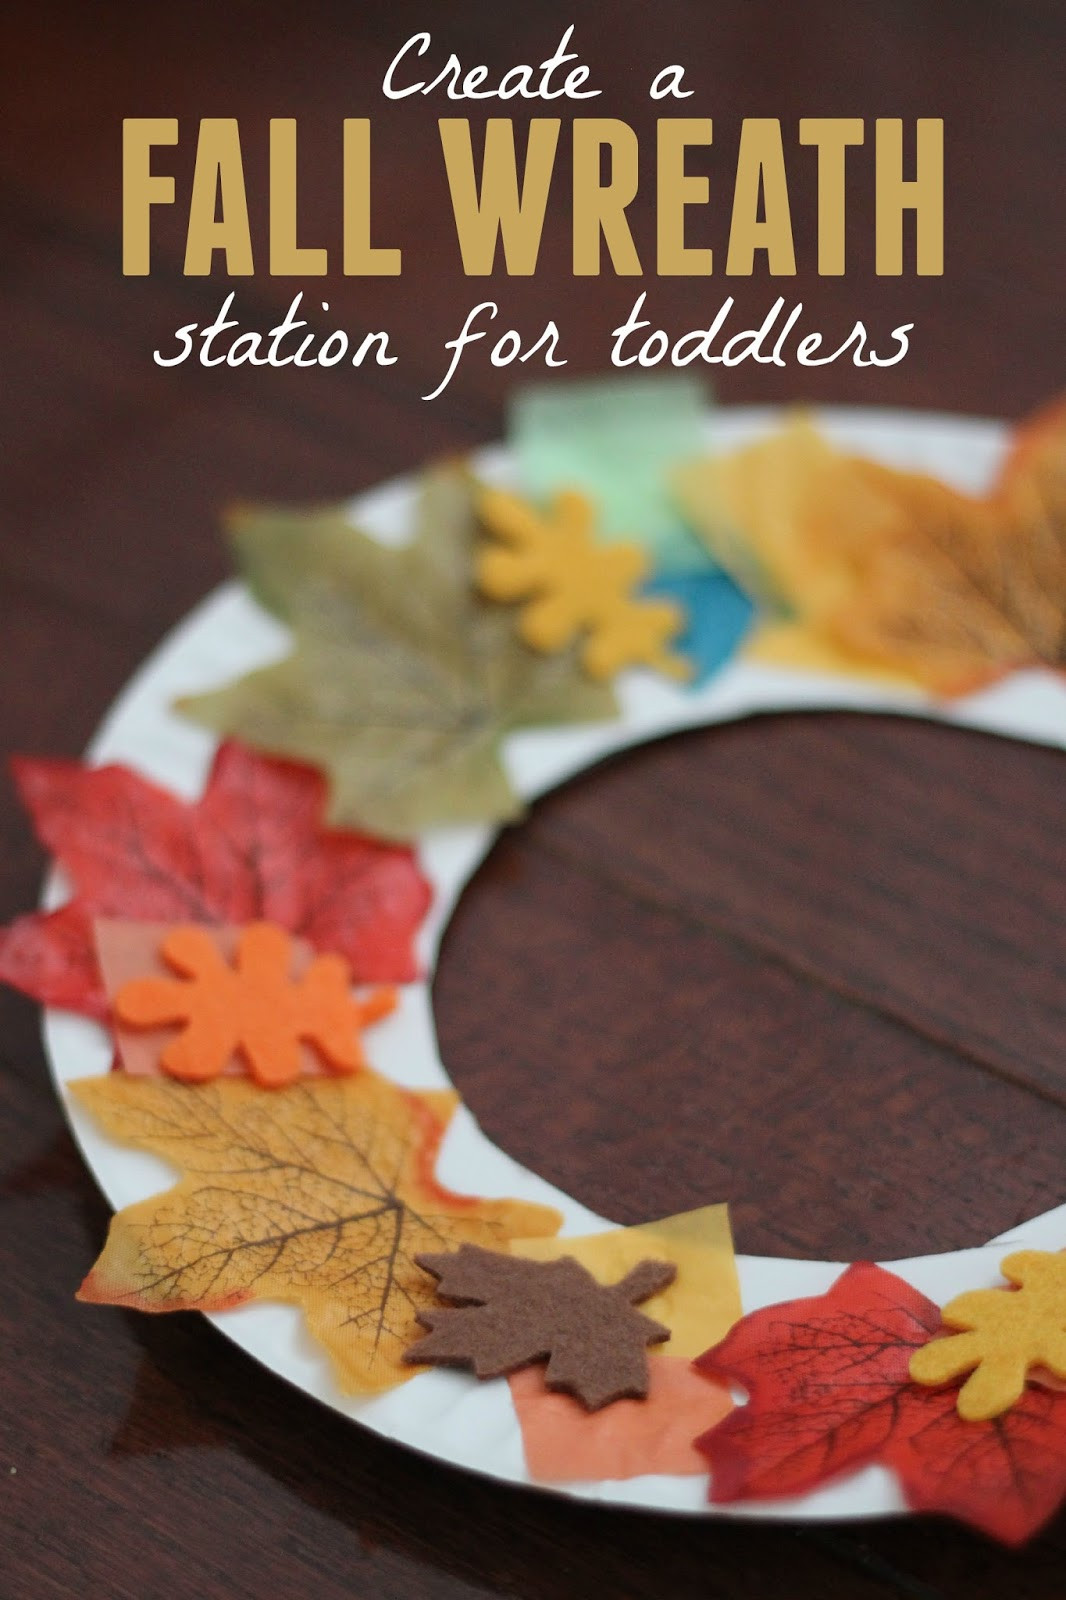 Fall Art Projects For Kids
 Toddler Approved Fall Wreath Making Station for Toddlers